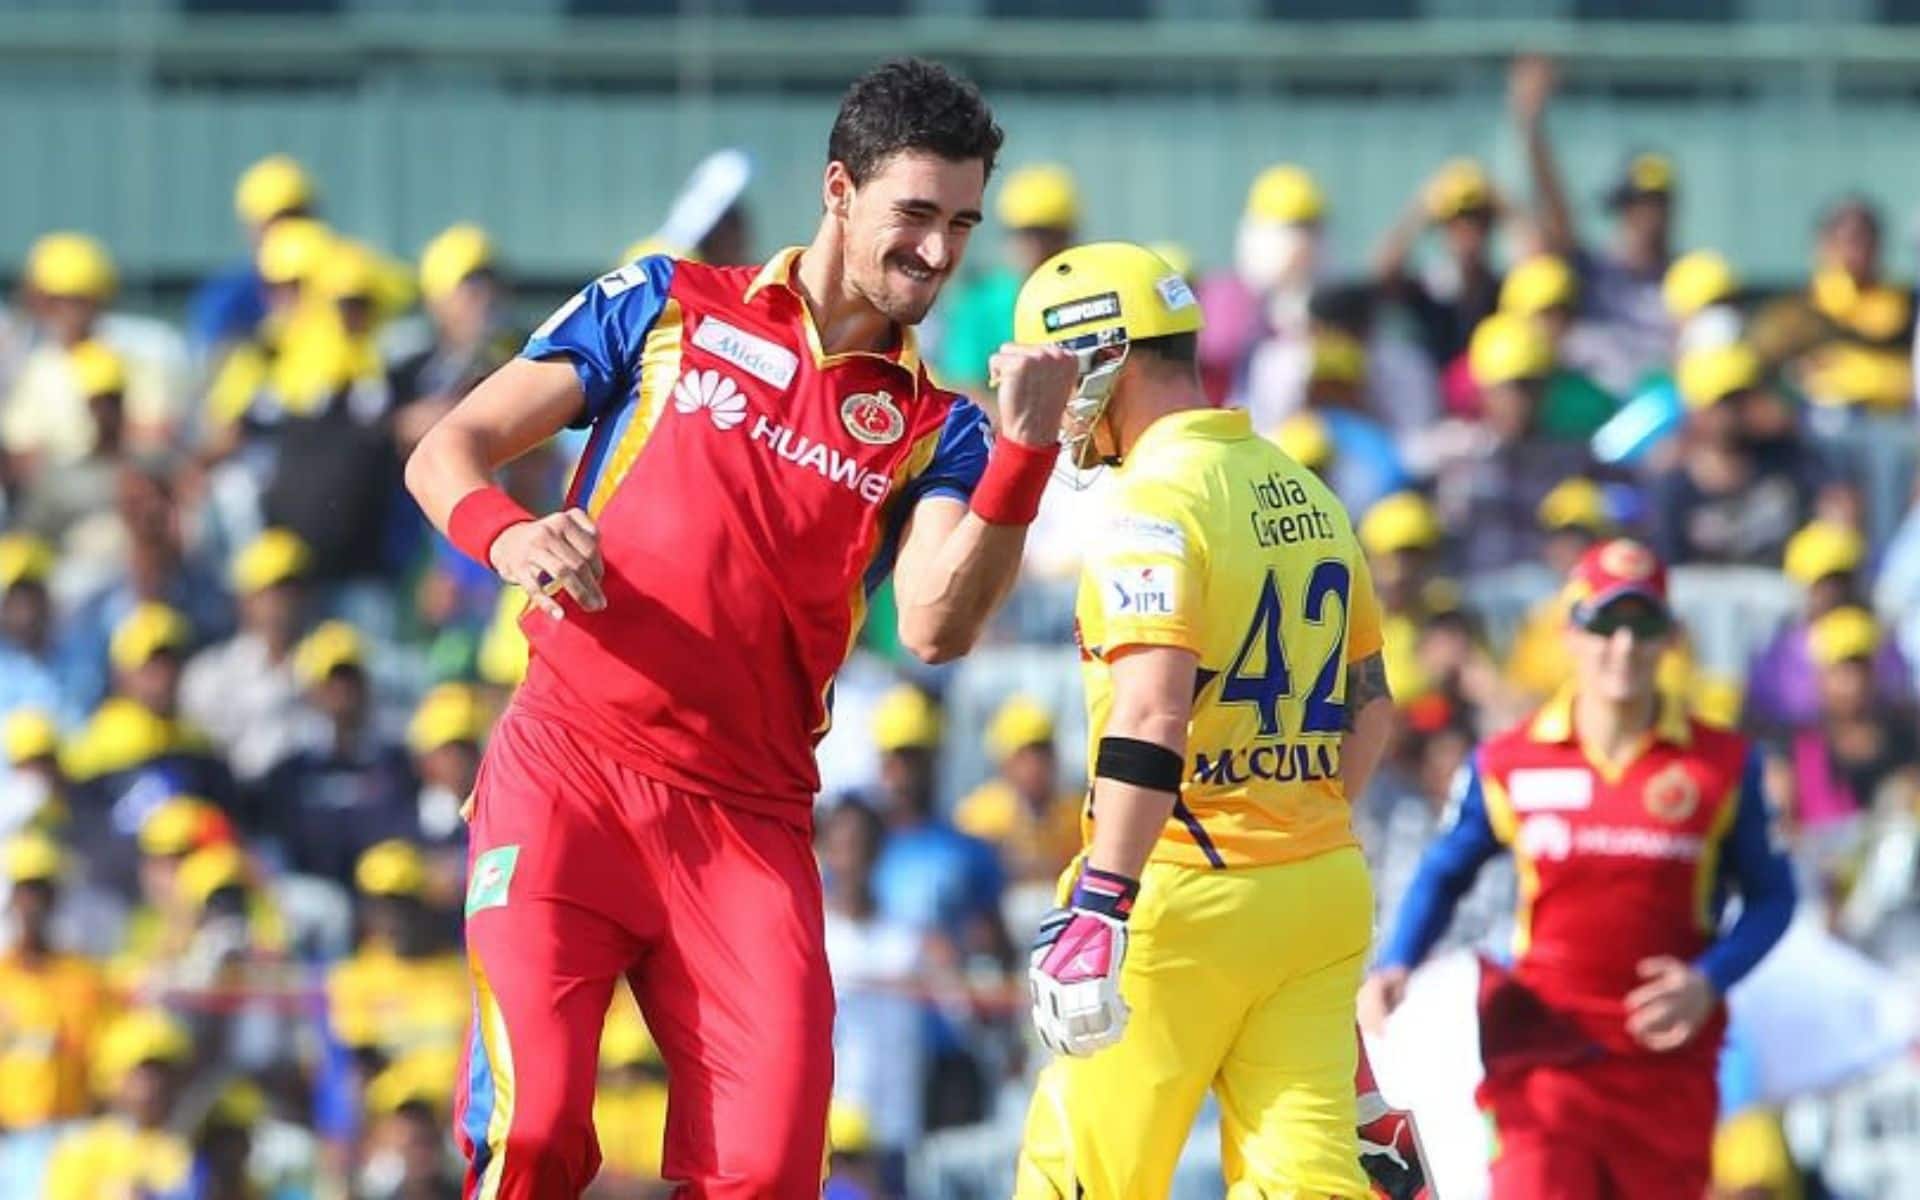 Starc, who played for RCB, will turn up for the Knight Riders. (X.com)